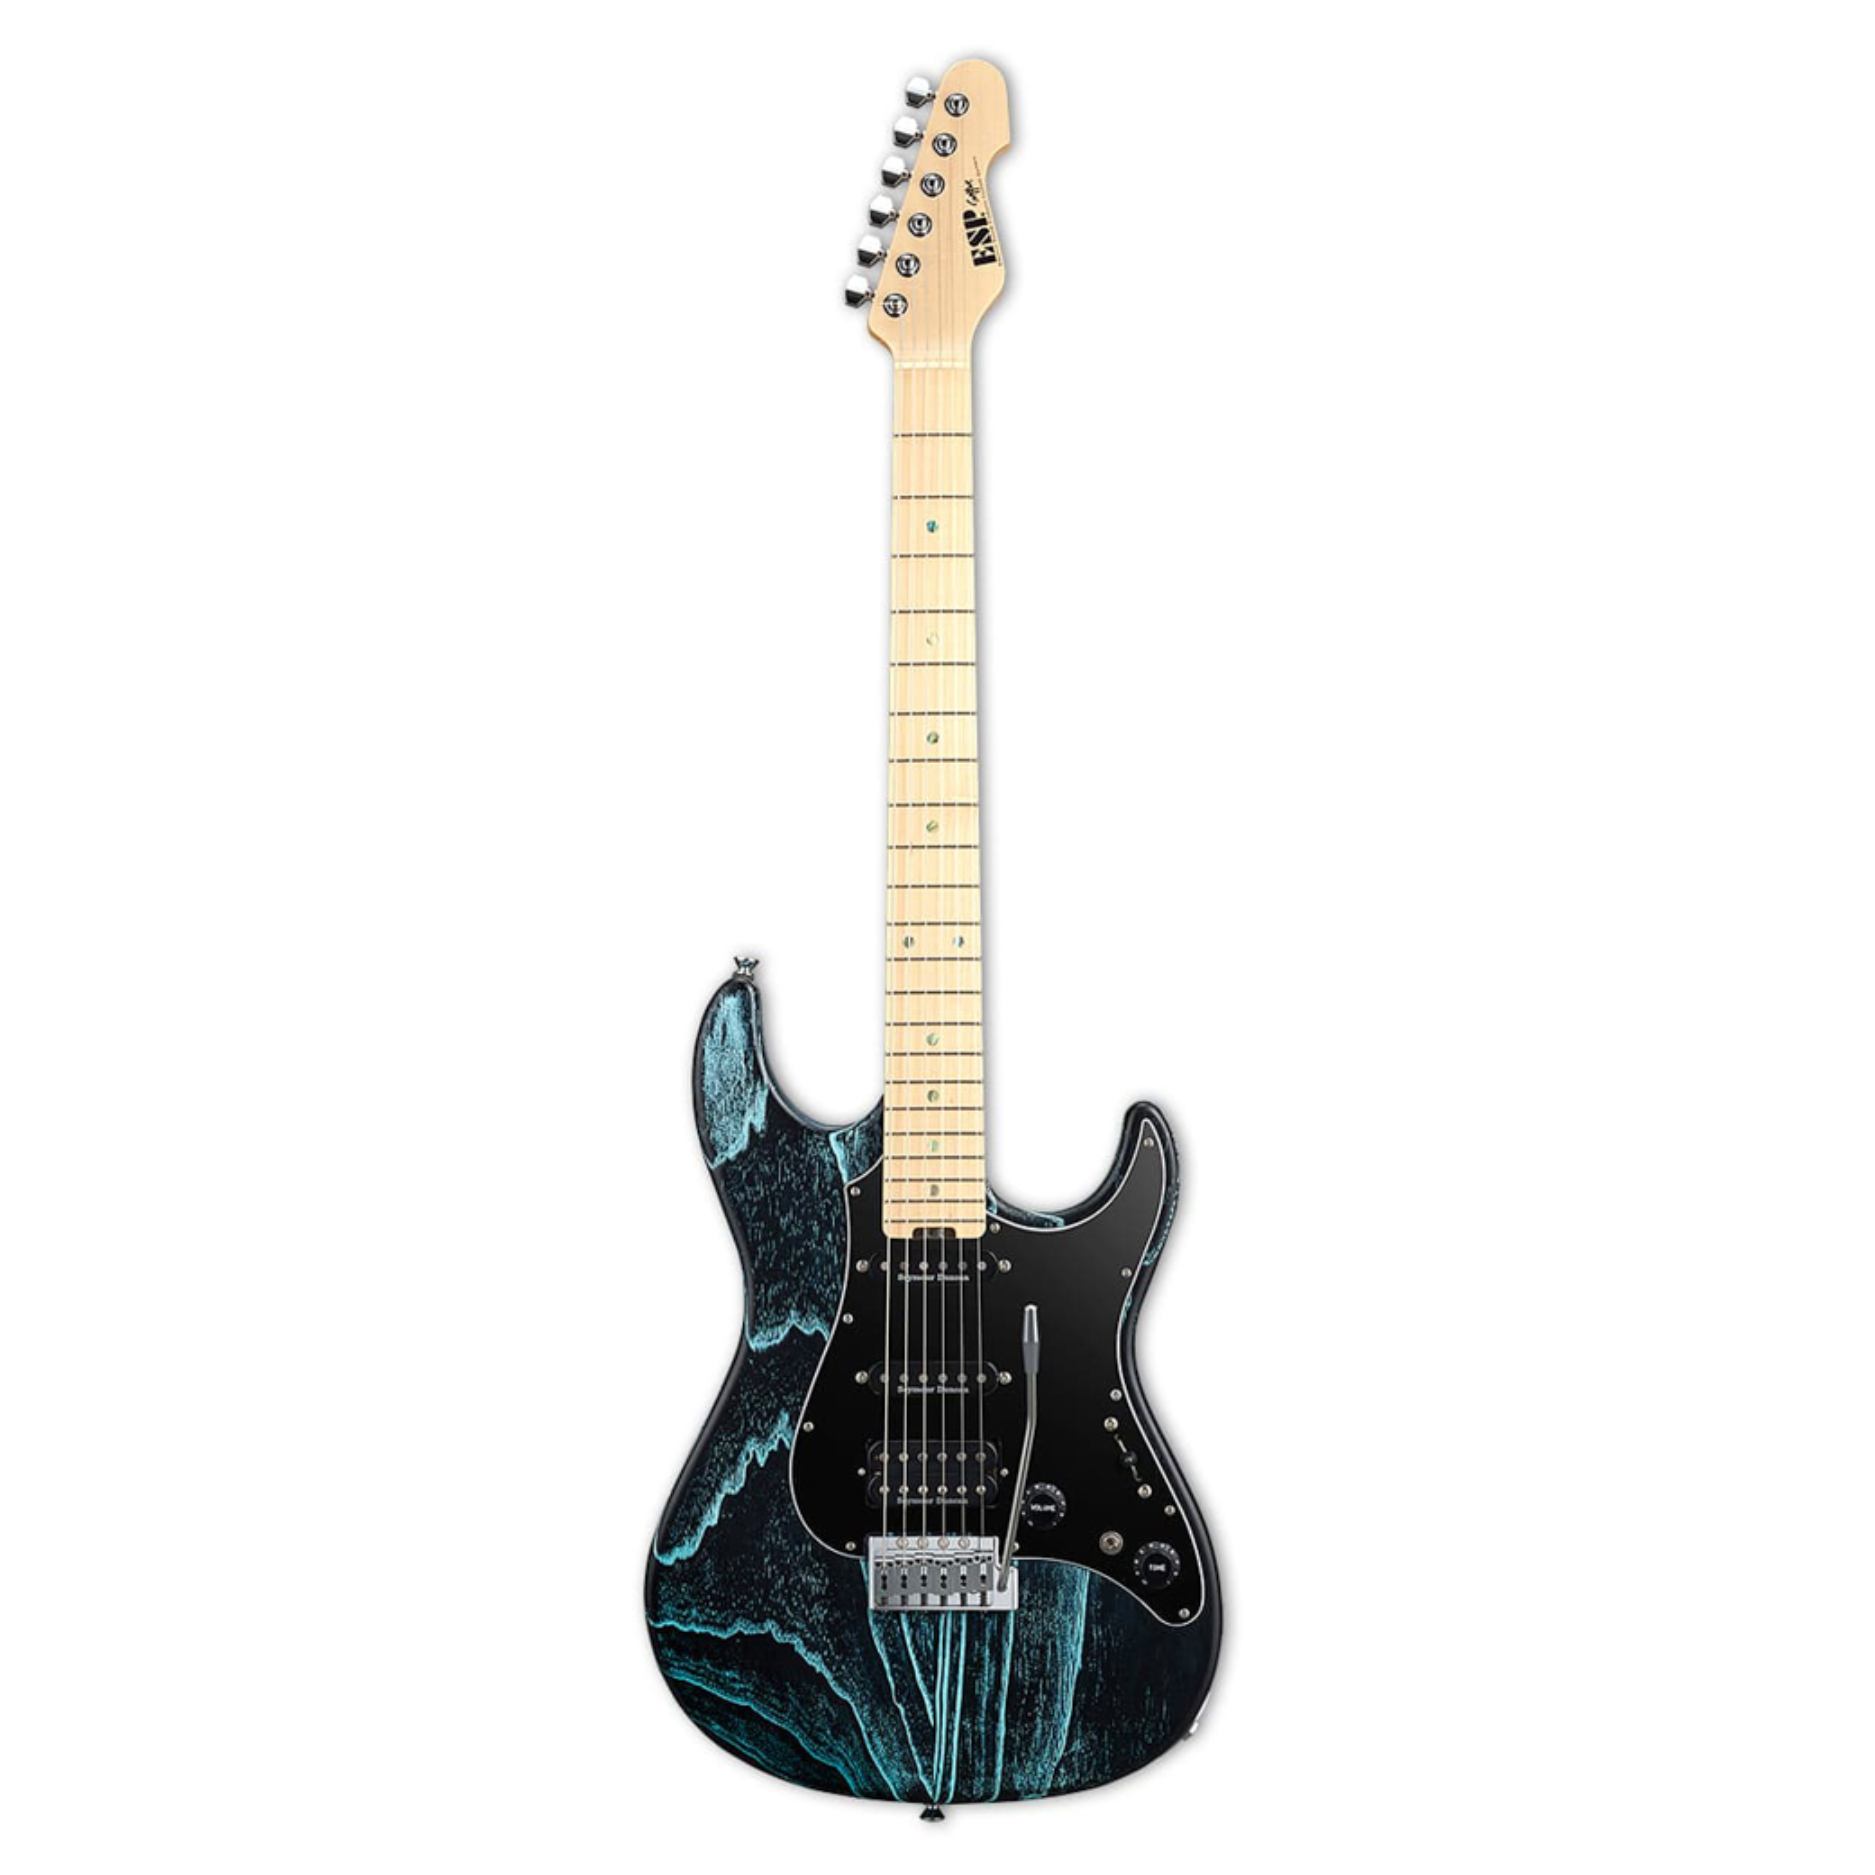 ESP Snapper-AS Driftwood Series Electric Guitar - Black with Blue Filler (SNAPPERASM)